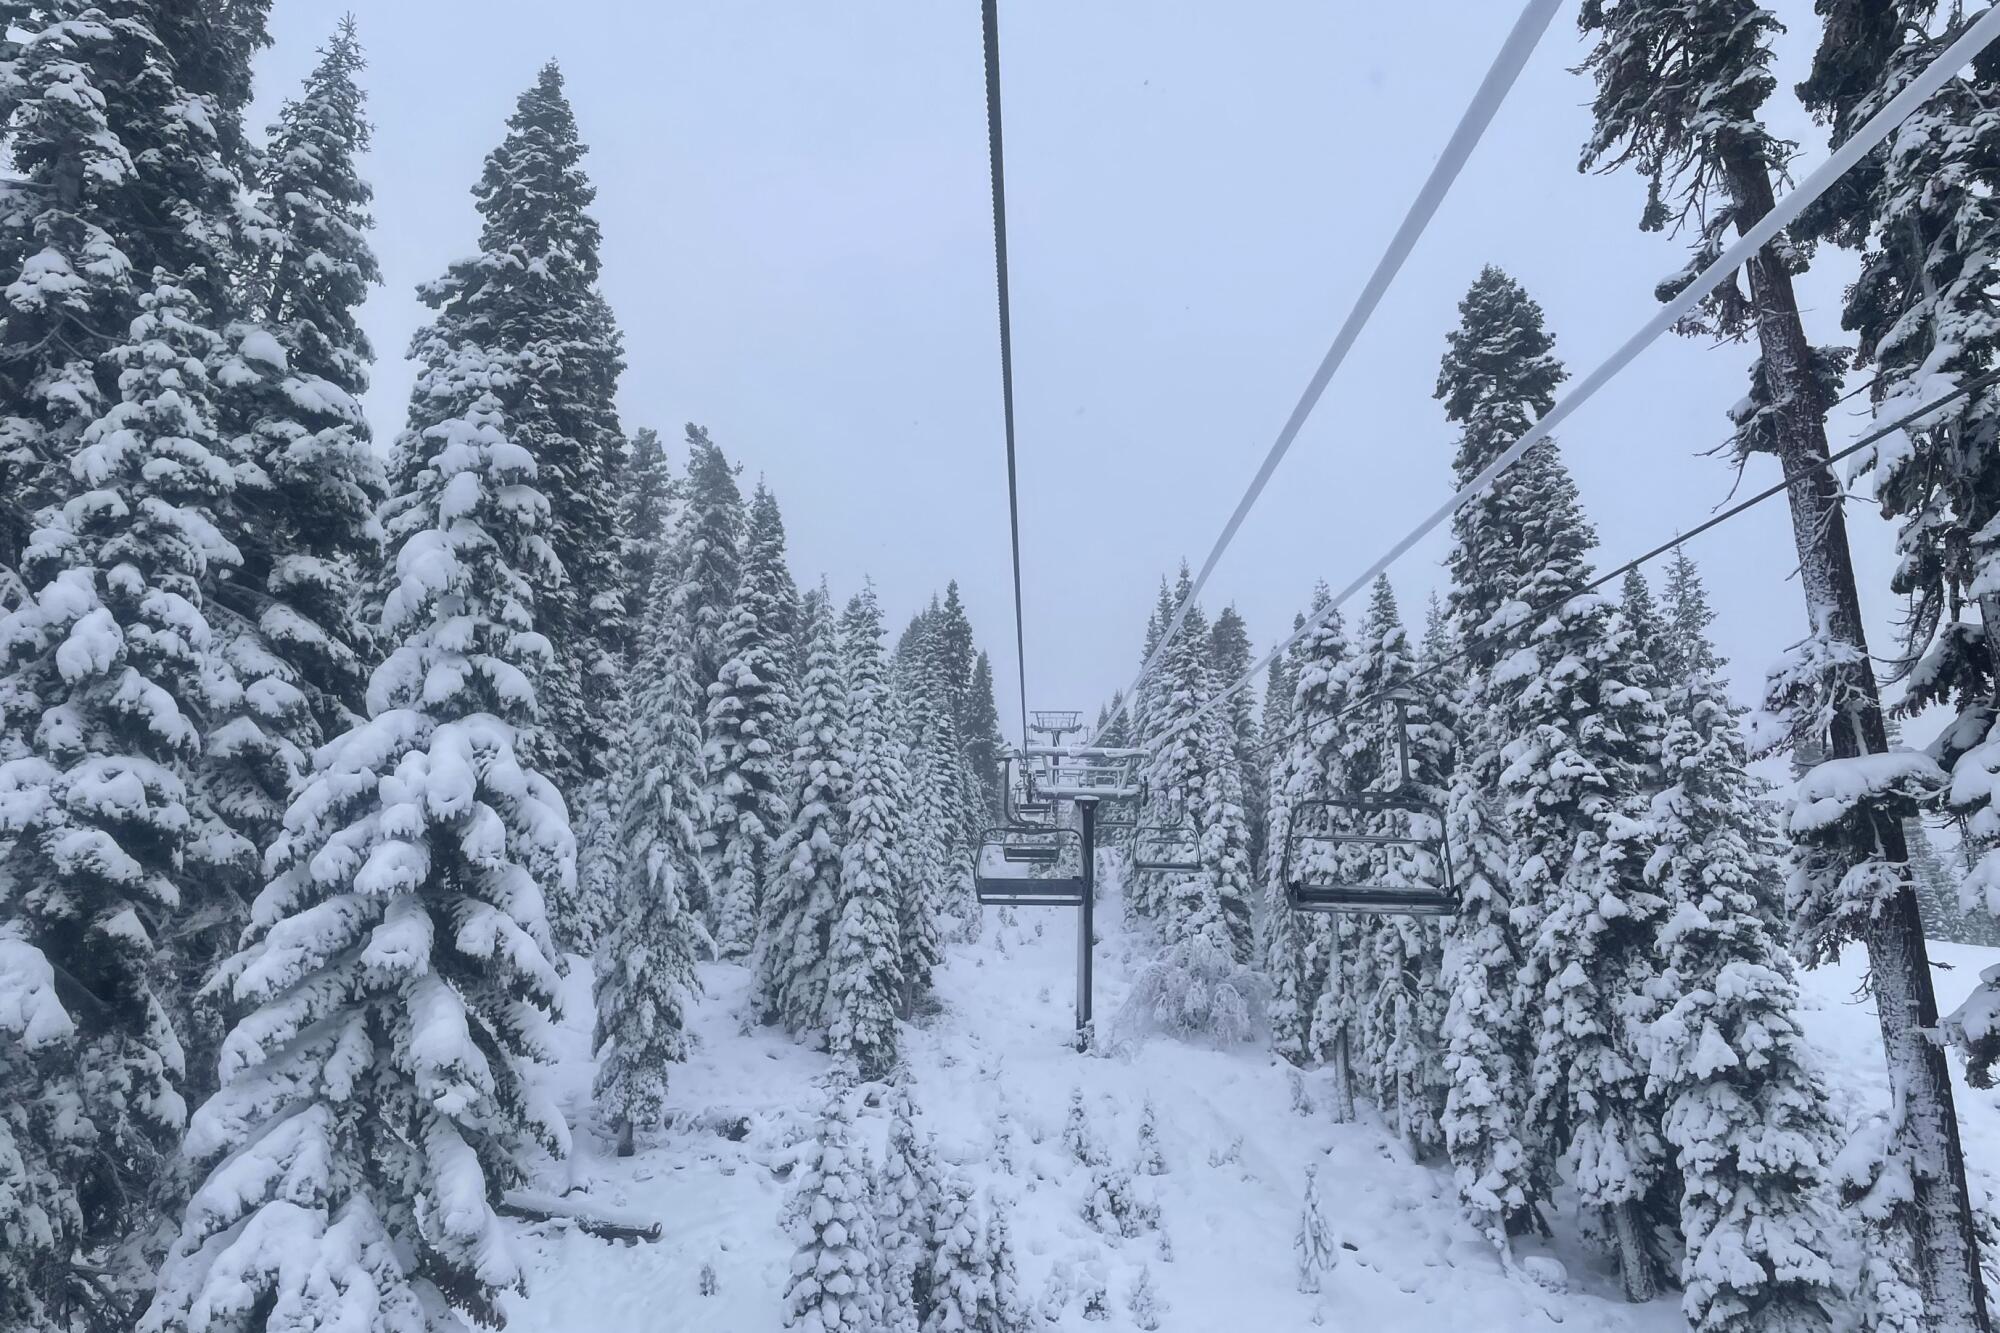 Fresh snow surrounds a ski lift and blankets pine trees